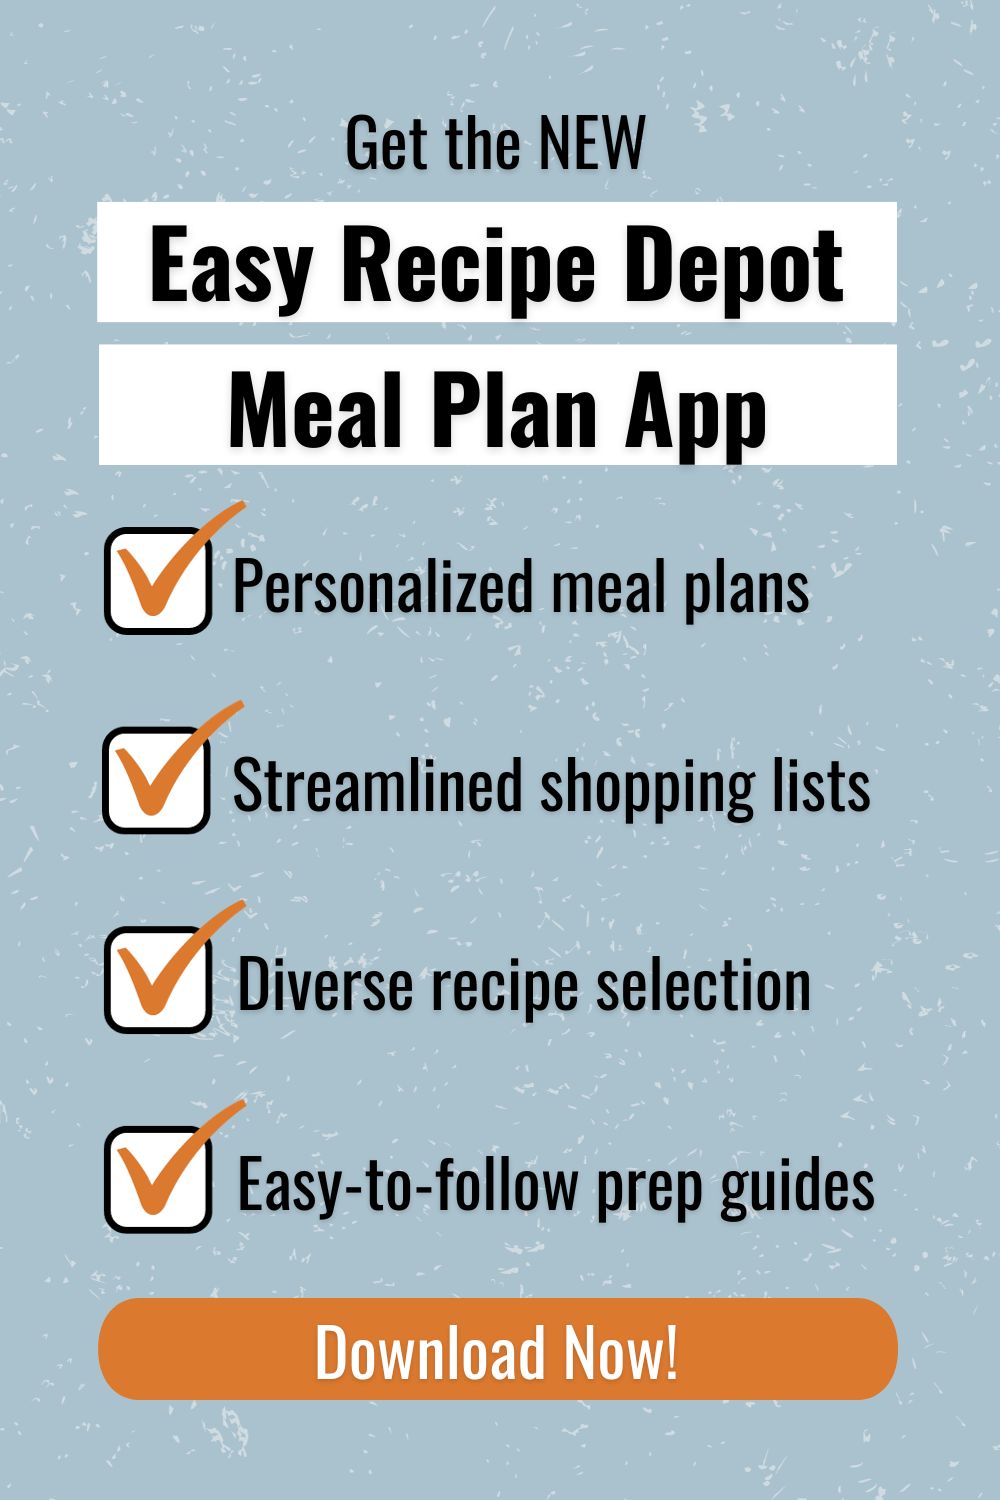 Get the new Easy Recipe Depot Meal Plan App. Personalized meal plans, streamlined shopping lists, diverse recipe selection, easy-to-follow prep guides.